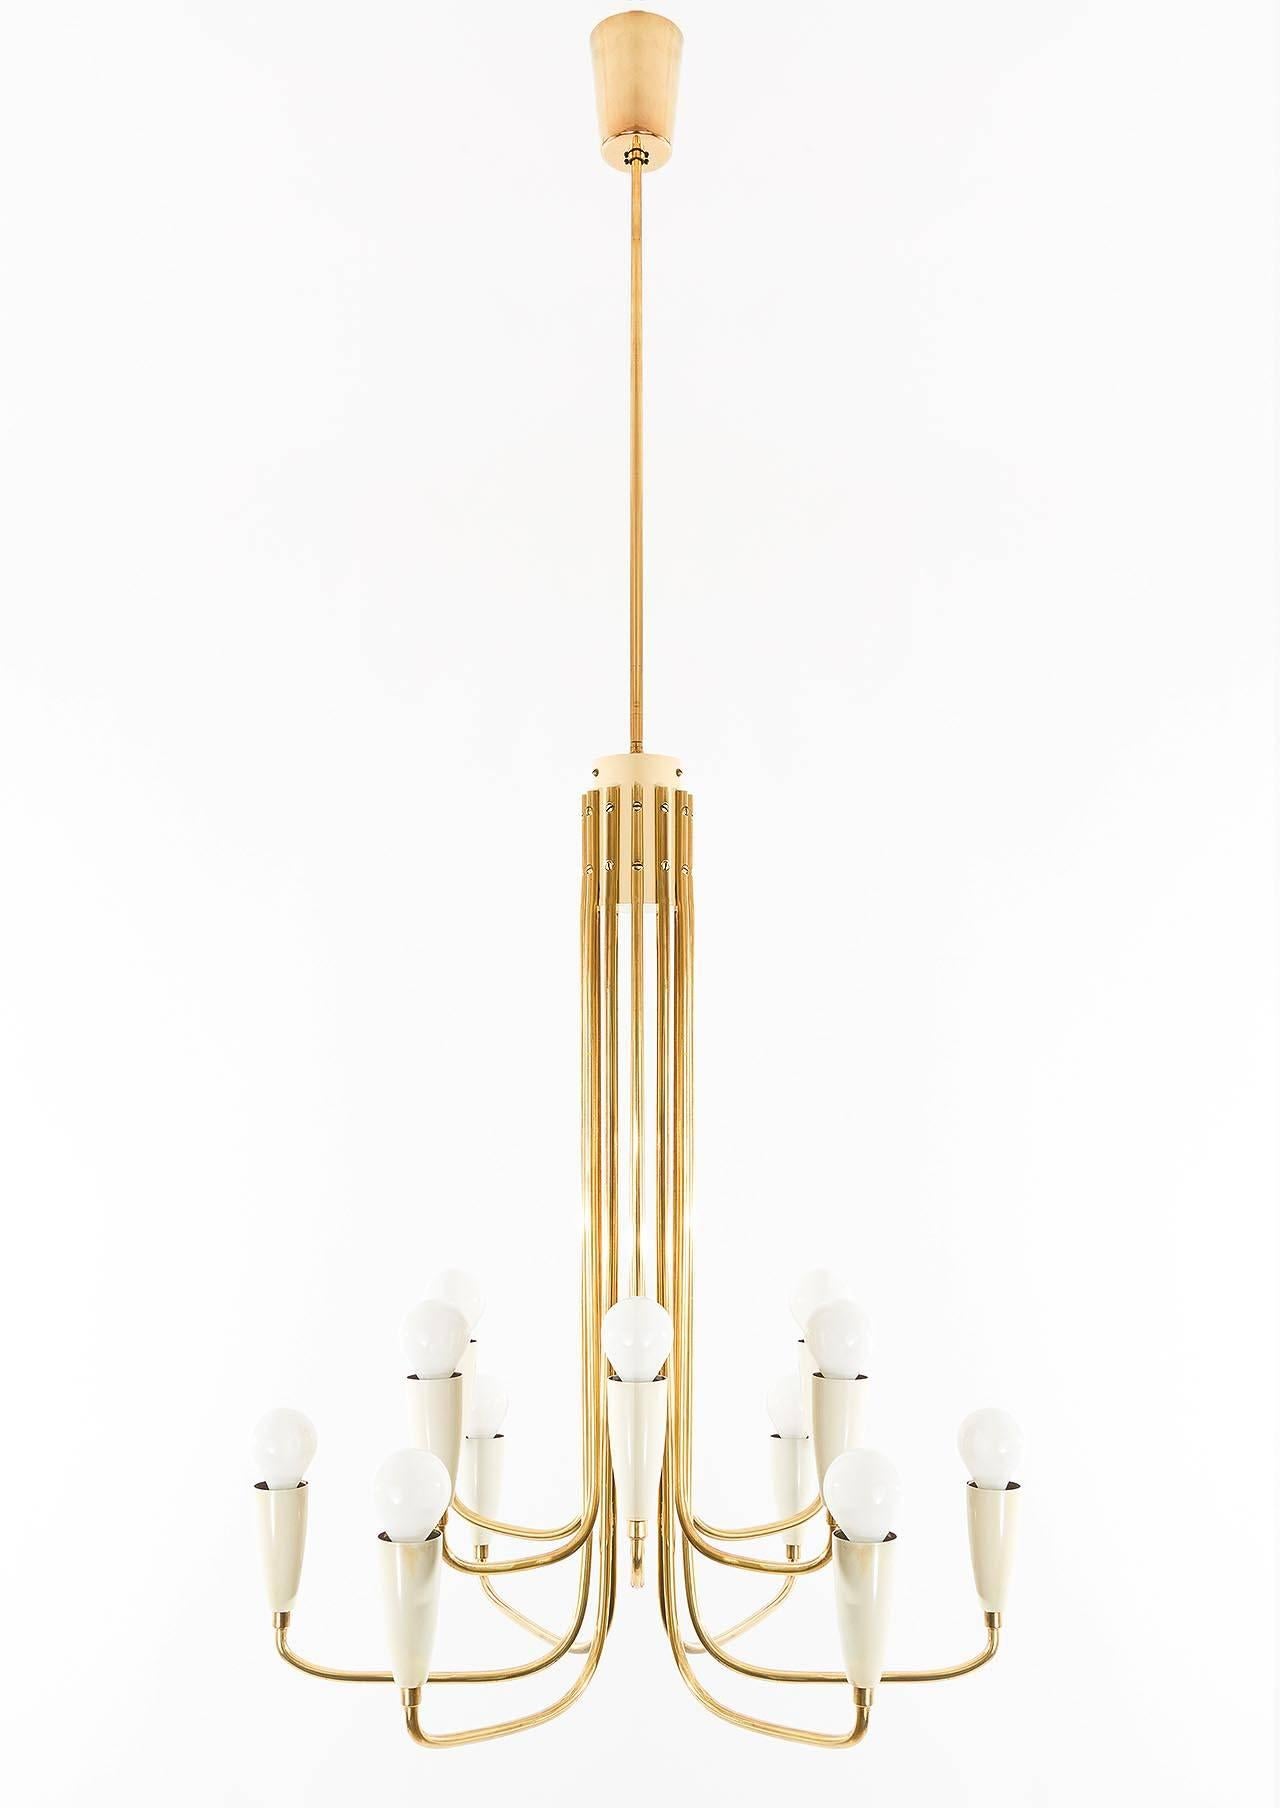 A beautiful 12-arm brass chandelier attributed to Rupert Nikoll, Austria, 1950's. 
The light has 12 sockets for small Edison screw base E14 bulbs or LEDs (max. 40W per bulb) which are covered with high-quality pressed glass lamp shades. It is